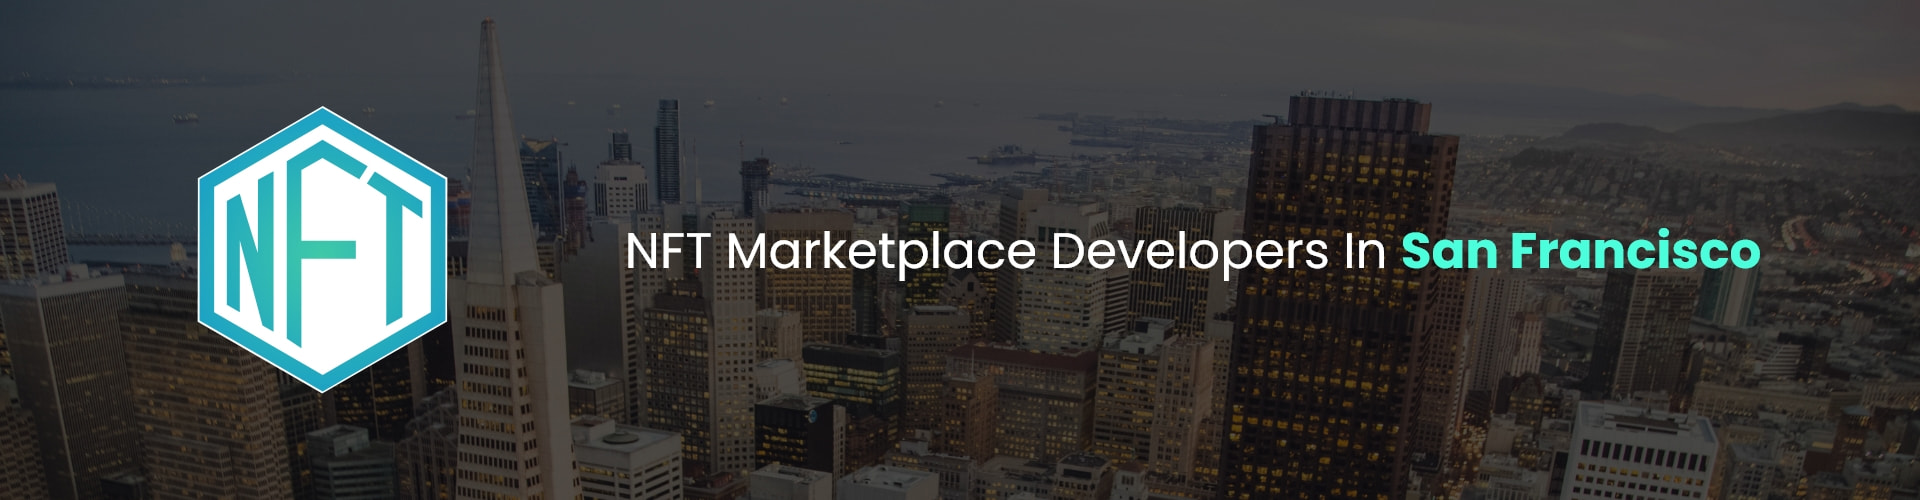 hire nft marketplace developers in san francisco